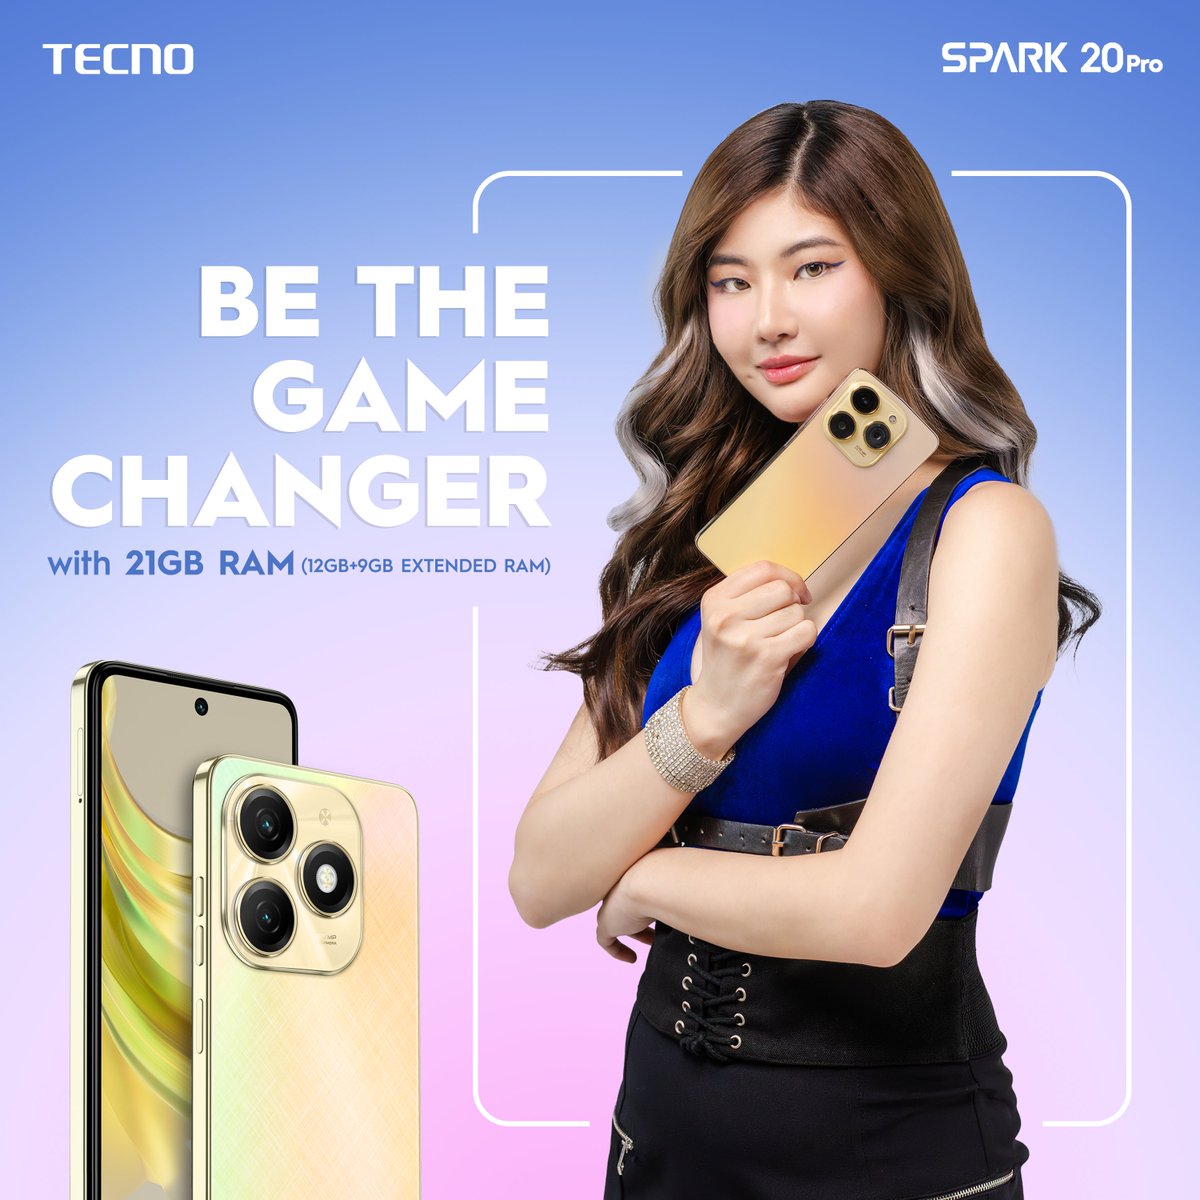 Be the game changer like Yskaela Fujimoto! The #SPARK20Pro's 21GB RAM lets you maximize storage and elevate your gaming experience to new heights. Get yours now for only P8,999! 

Visit our official stores now!

#TECNOSPARK20Series #BeTheGameChanger #TECNOPhilippines